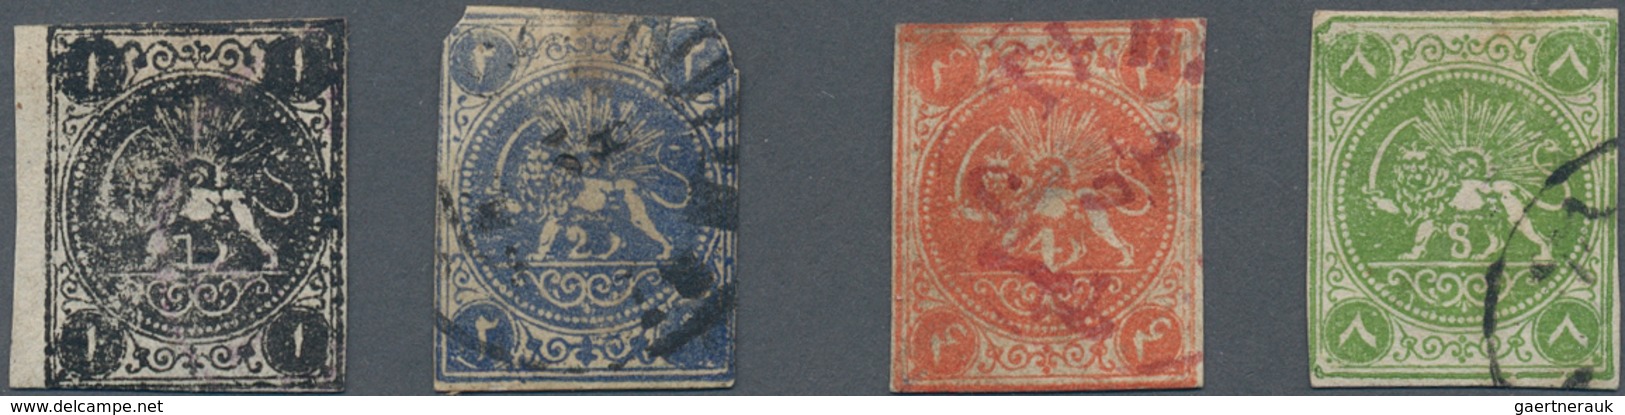 Iran: 1868-78, Lions Issue 21 Stamps Clear Cancelled, Some Faults And Thins, Still Fine For Study - Iran